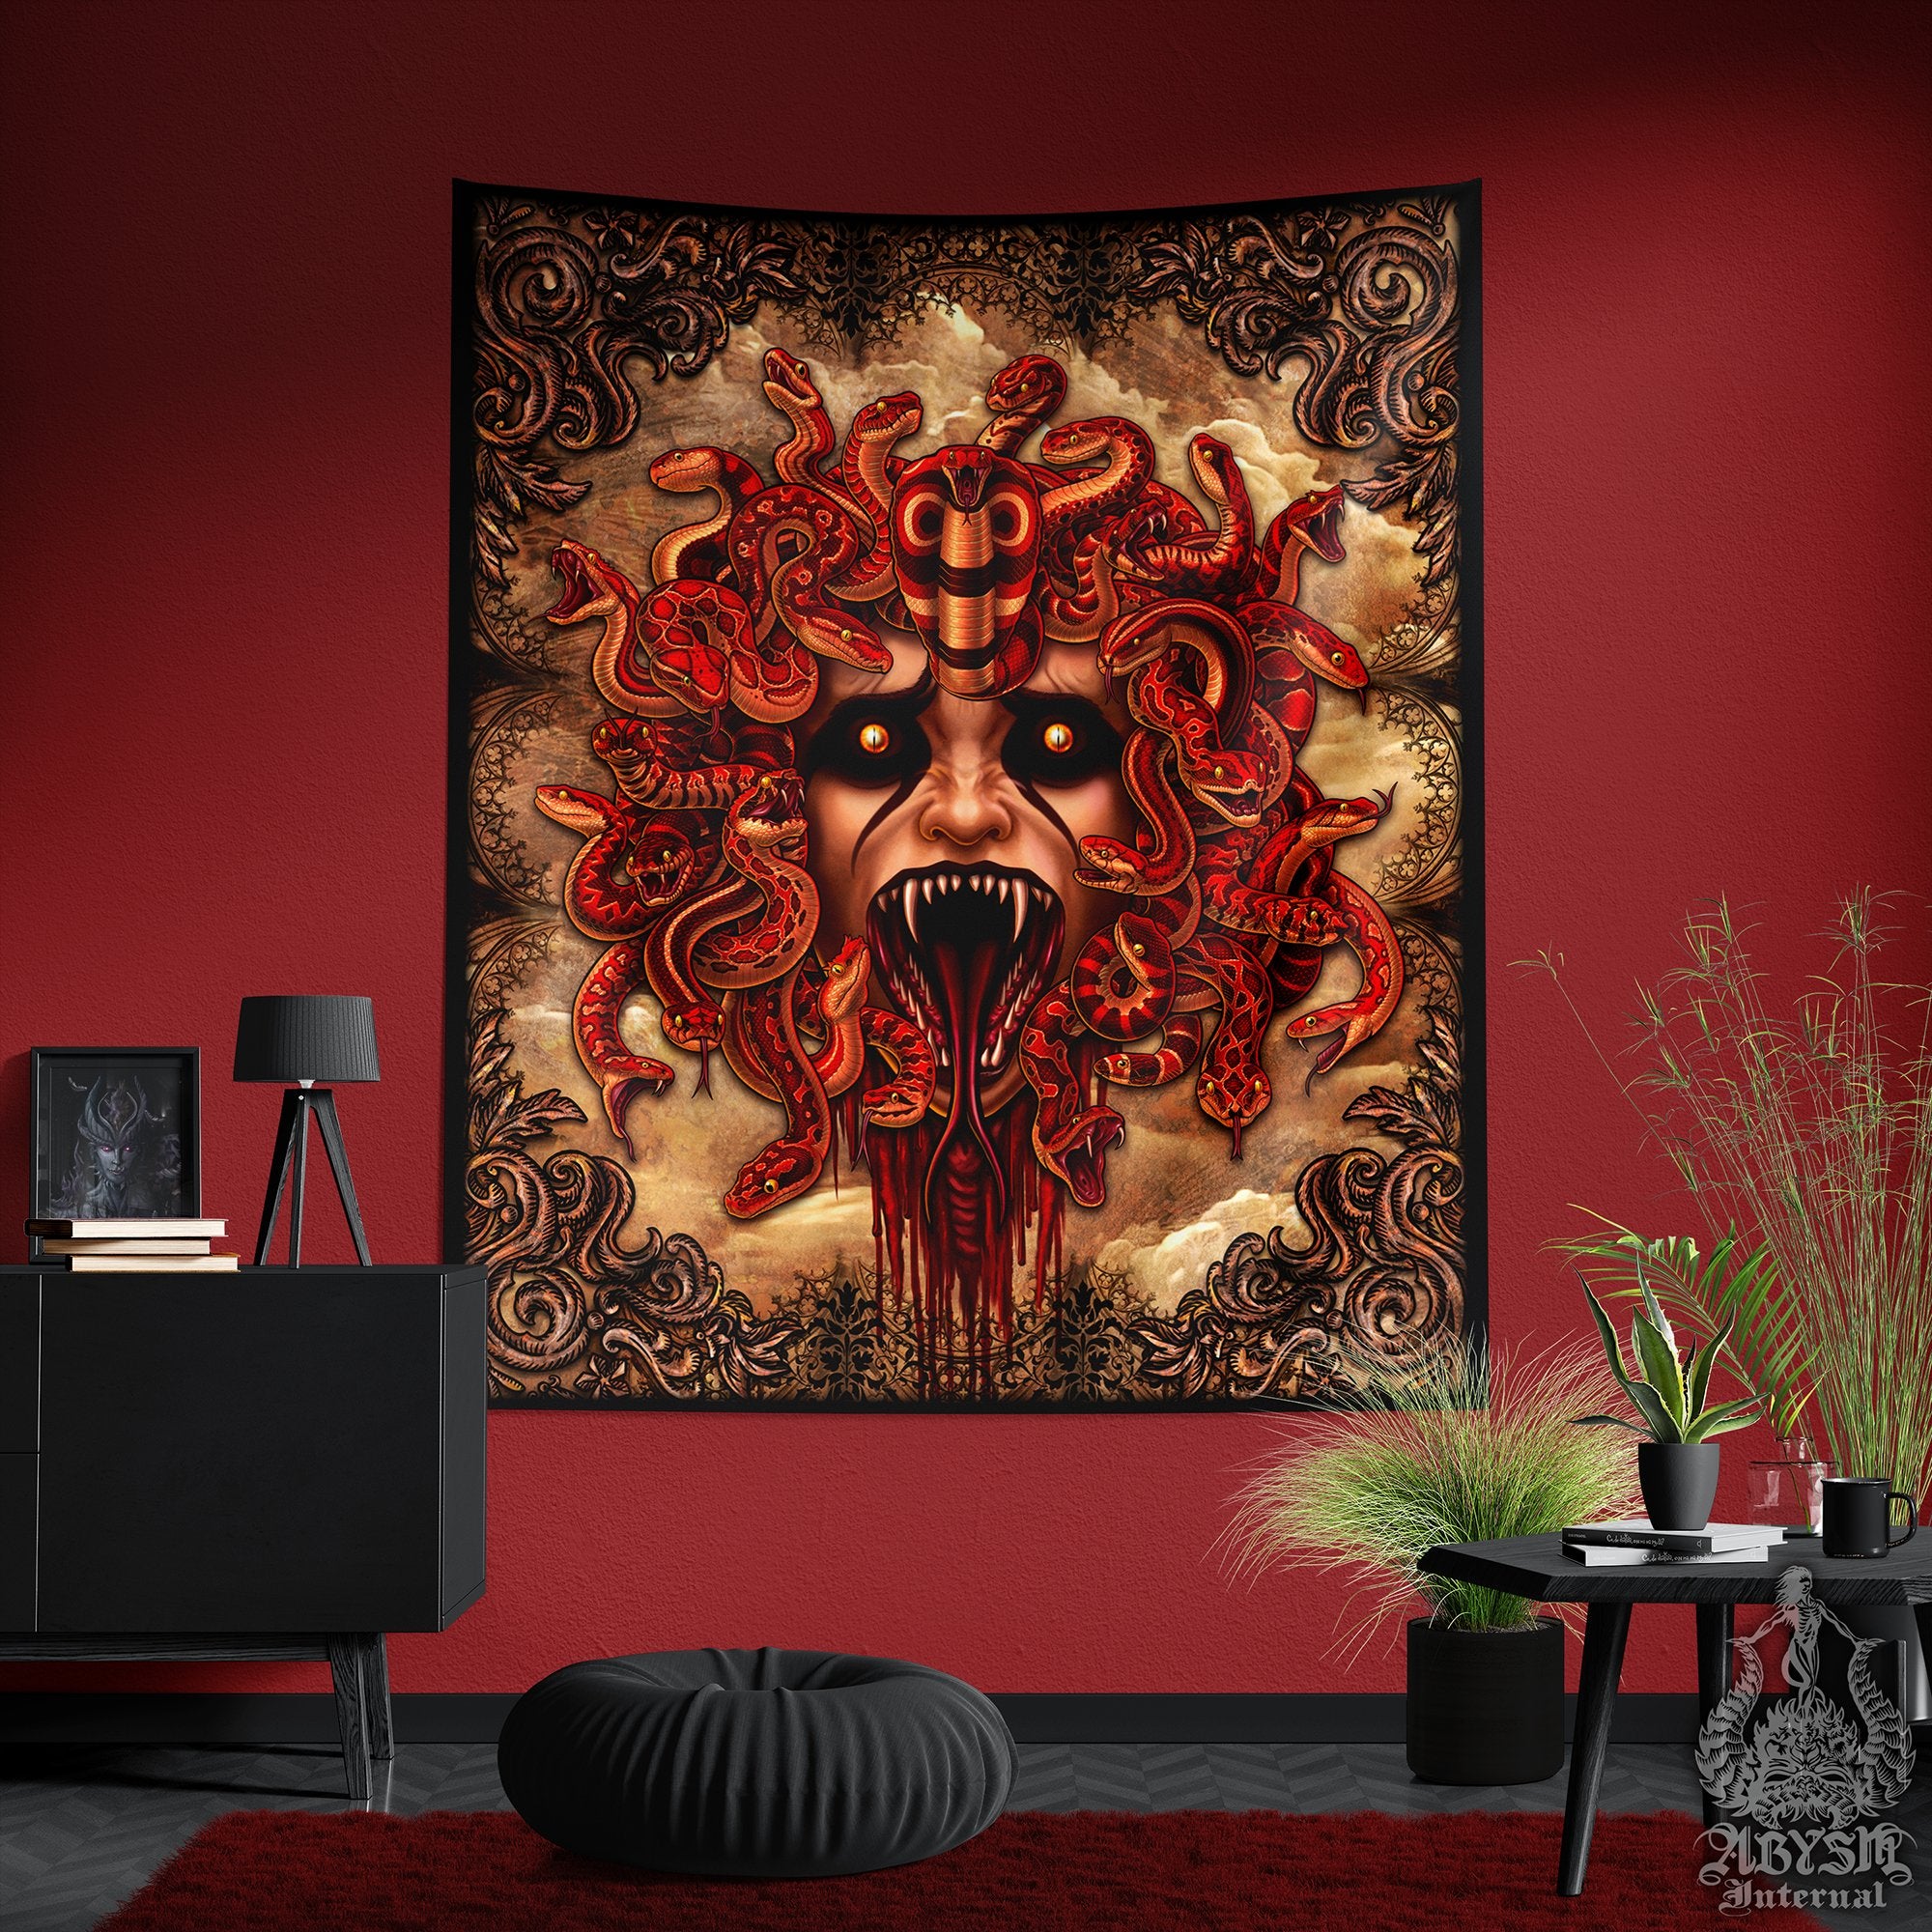 Goth Tapestry, Medusa Skull Wall Hanging, Gothic Home Decor, Vertical Art Print - Horror Beige & Red Snakes, 4 Faces - Abysm Internal